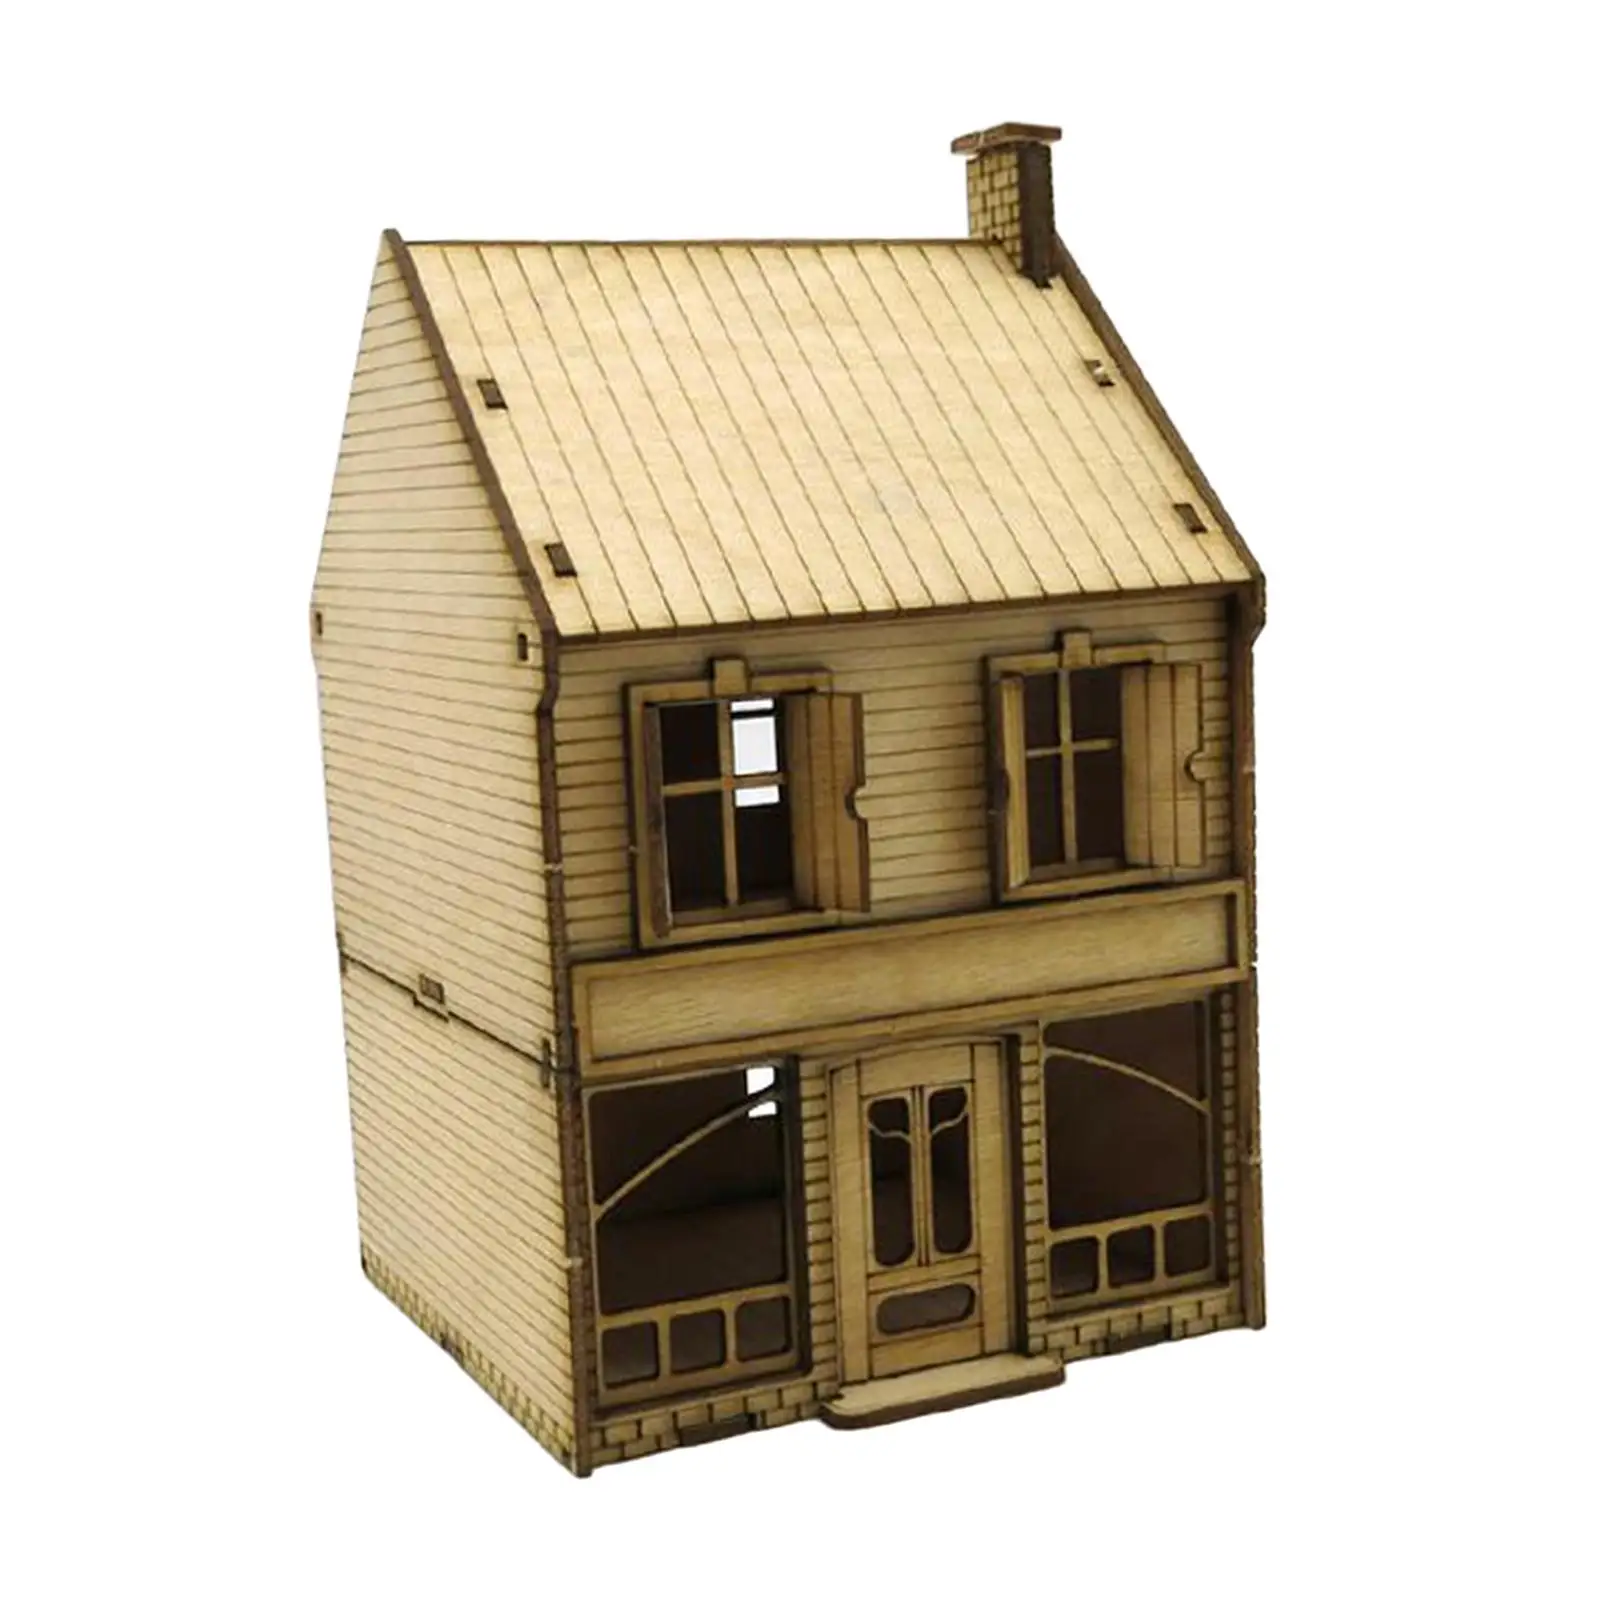 1/72 Wooden 2 Tier European House Unassembly Landscape Building Materials for Sand Table Model Railway Diorama Accessory Layout